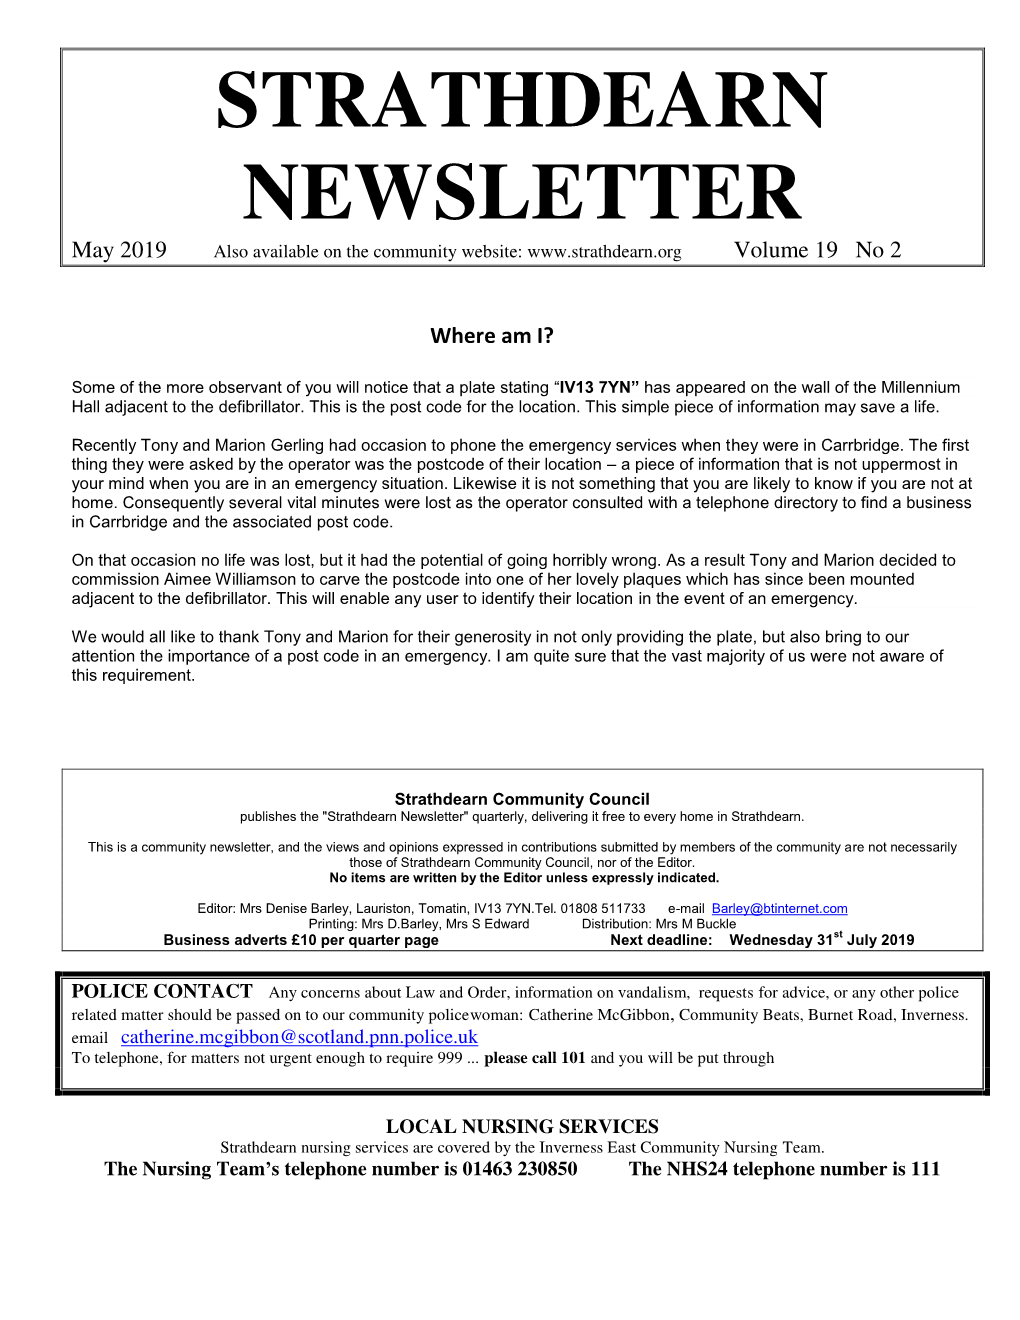 STRATHDEARN NEWSLETTER May 2019 Also Available on the Community Website: Volume 19 No 2